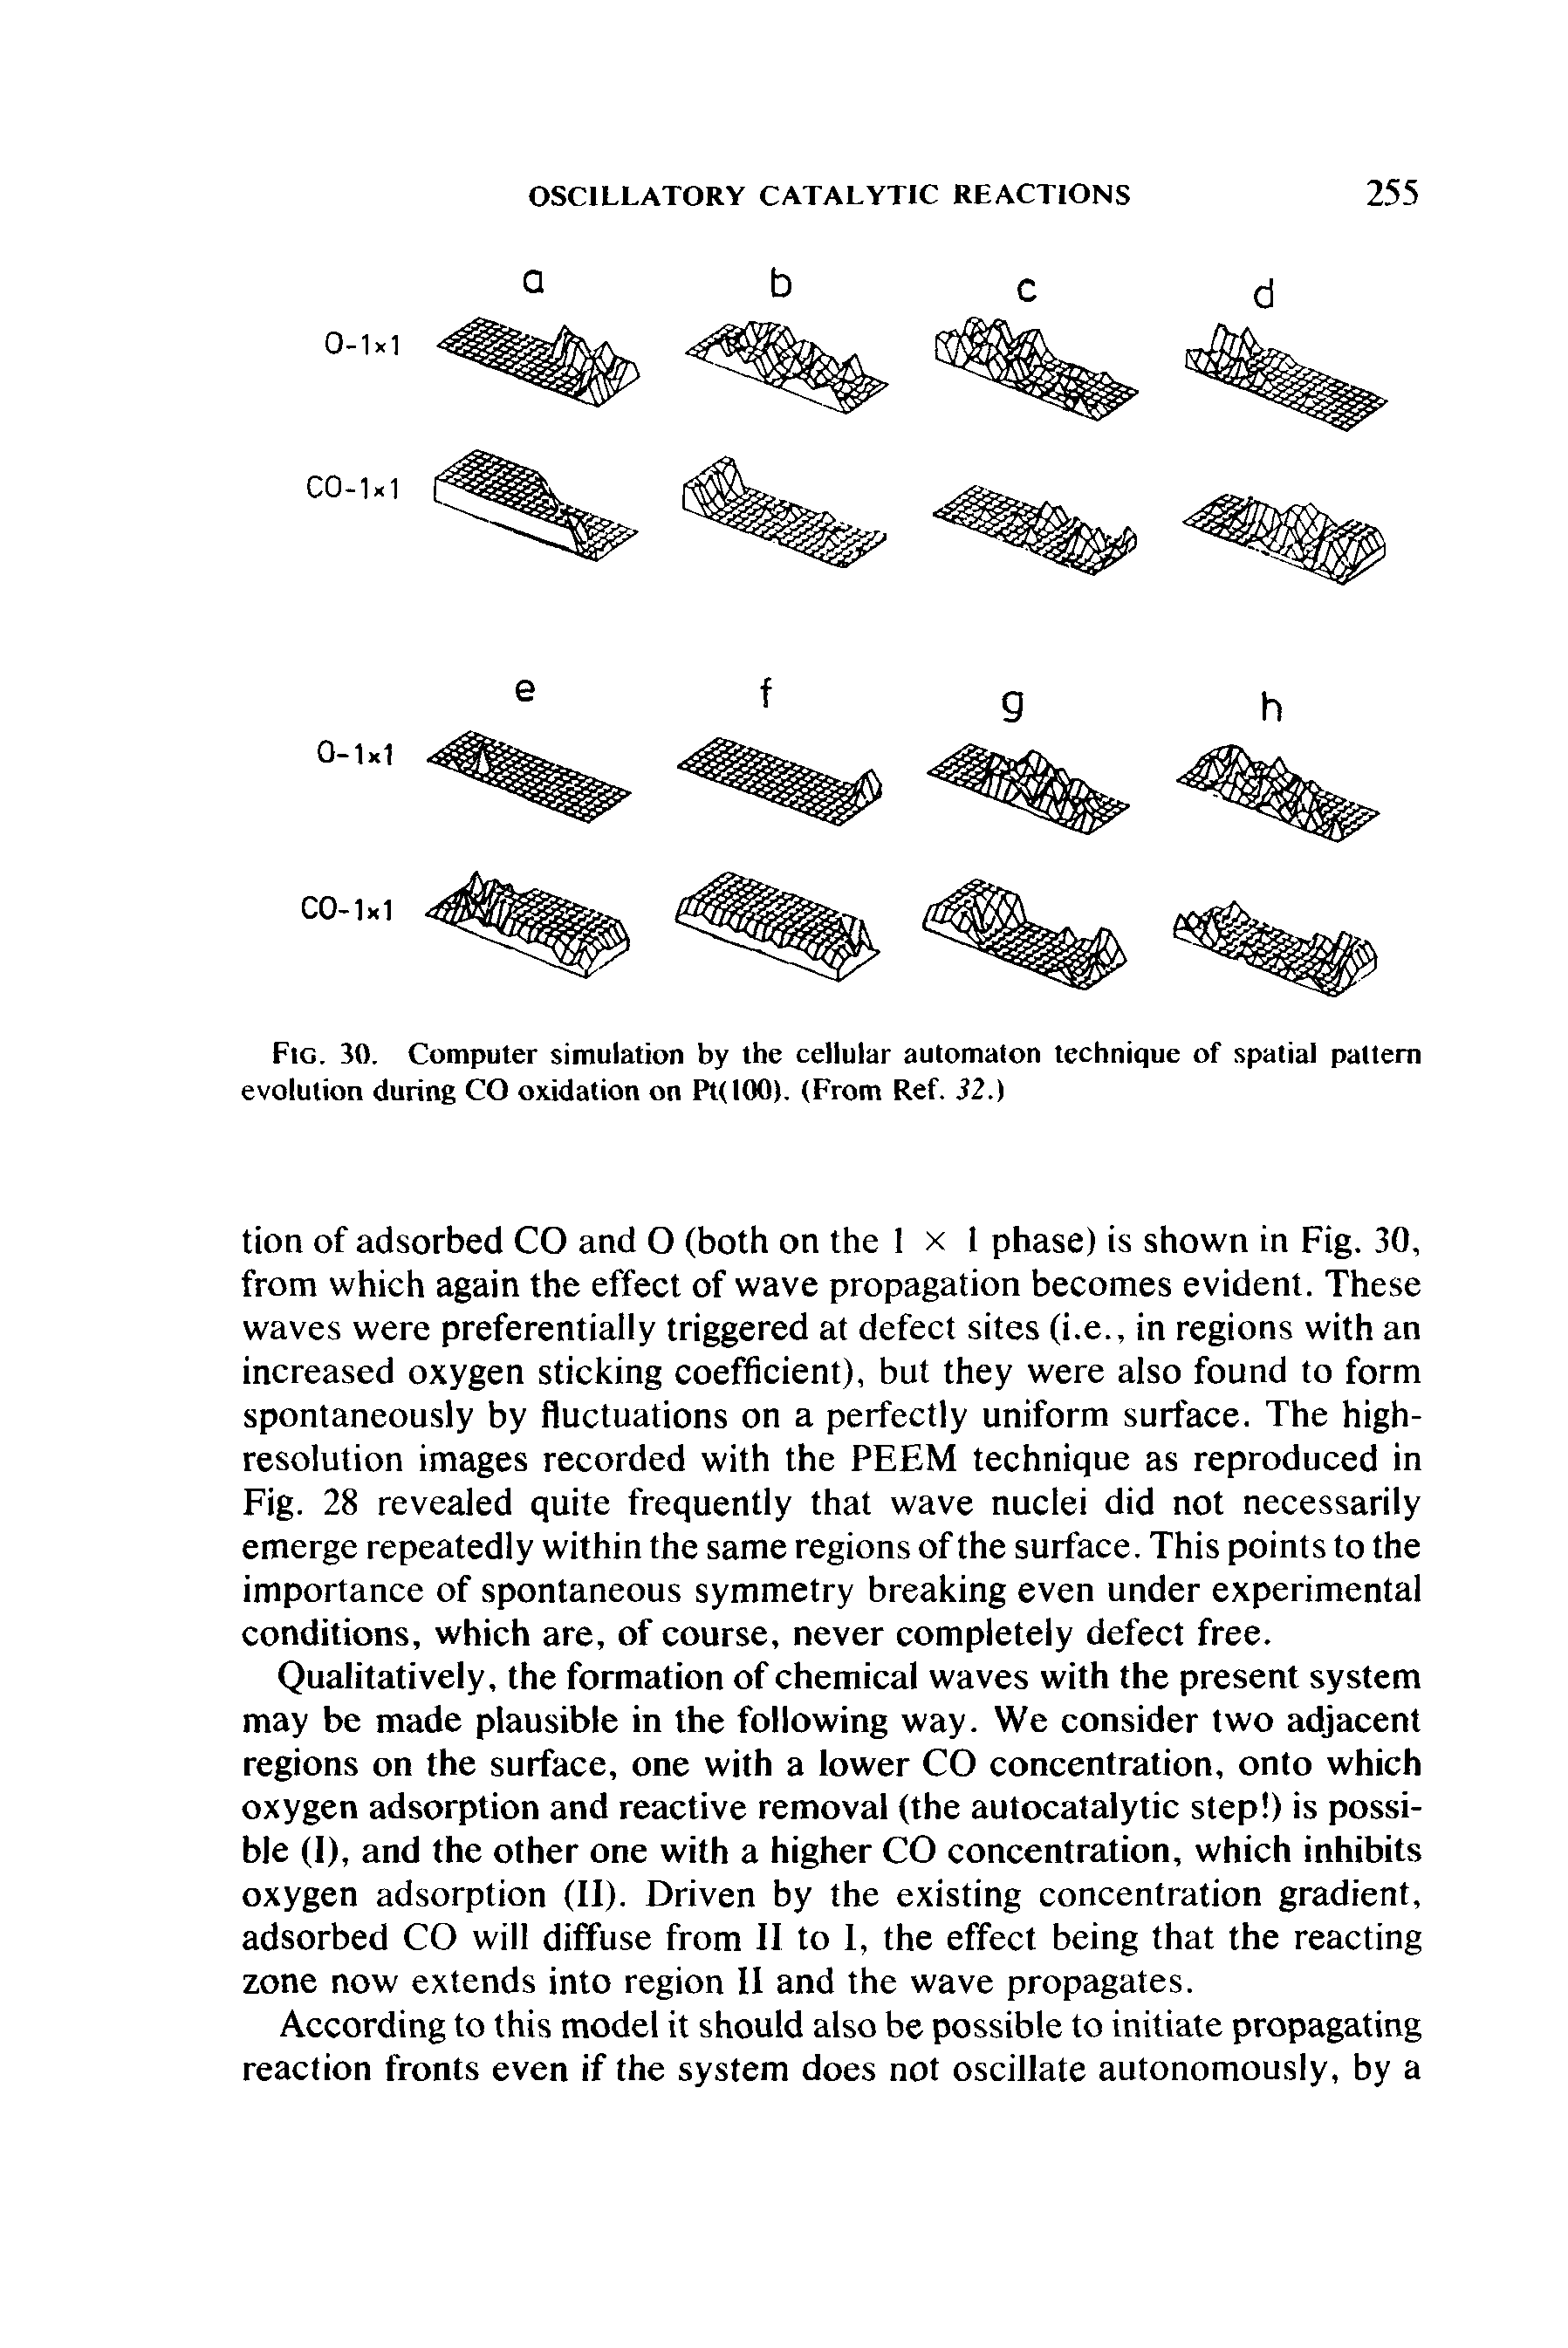 Fig. 30. Computer simulation by the cellular automaton technique of spatial pattern evolution during CO oxidation on Pt(100). (From Ref. 32.)...